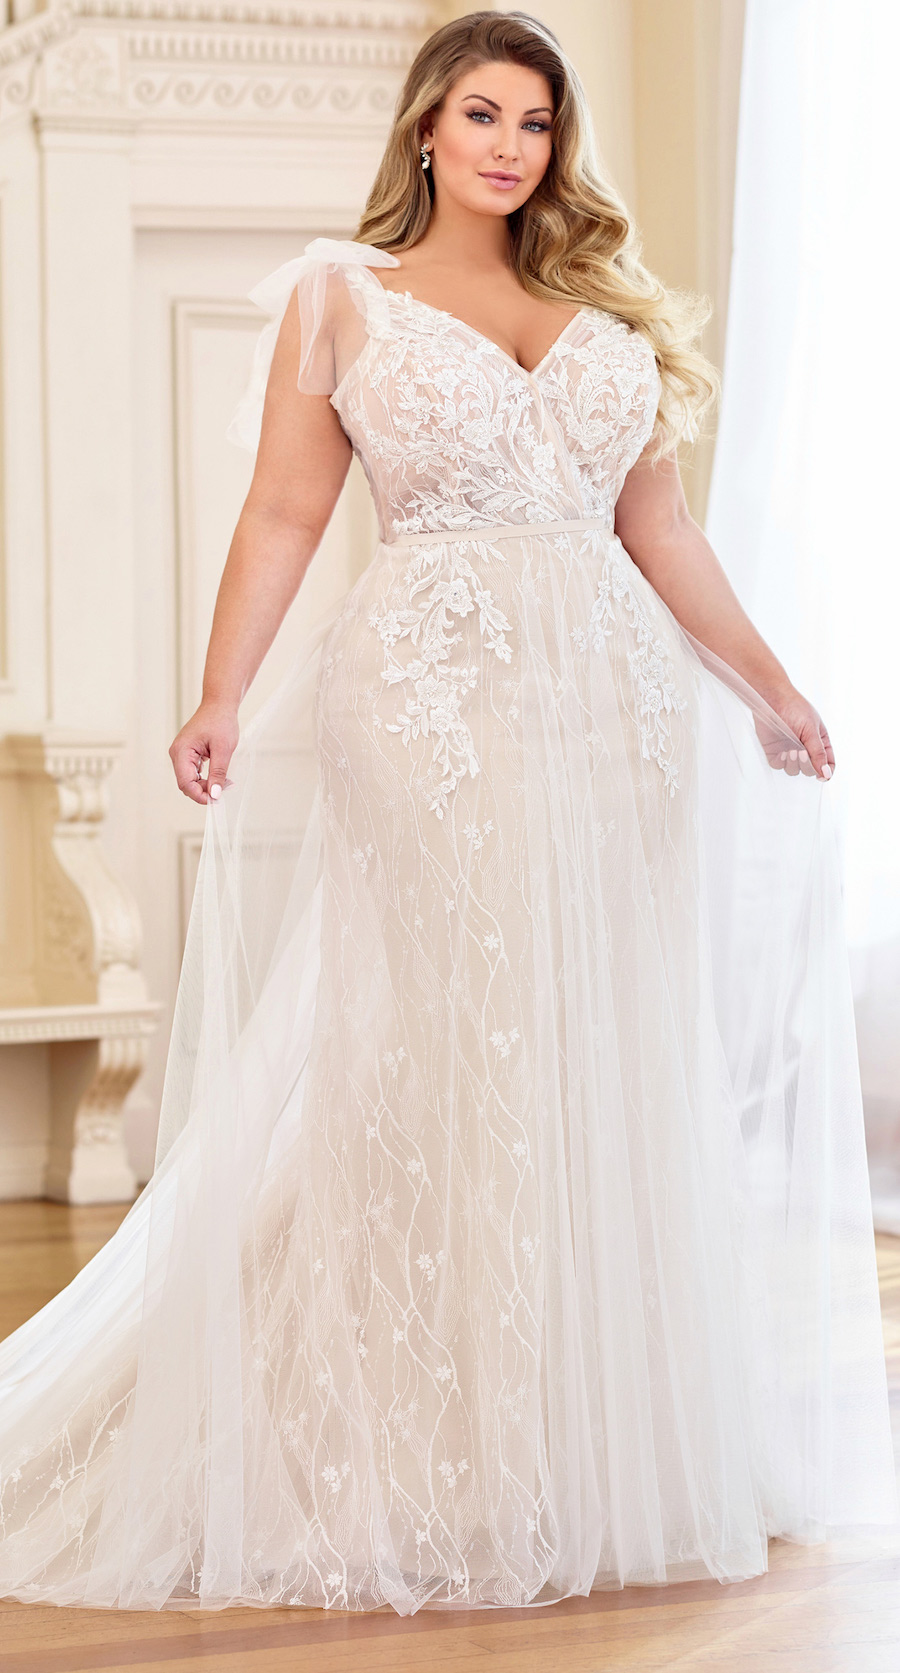 Amazing Short Plus Size Wedding Dresses of all time The ultimate guide 